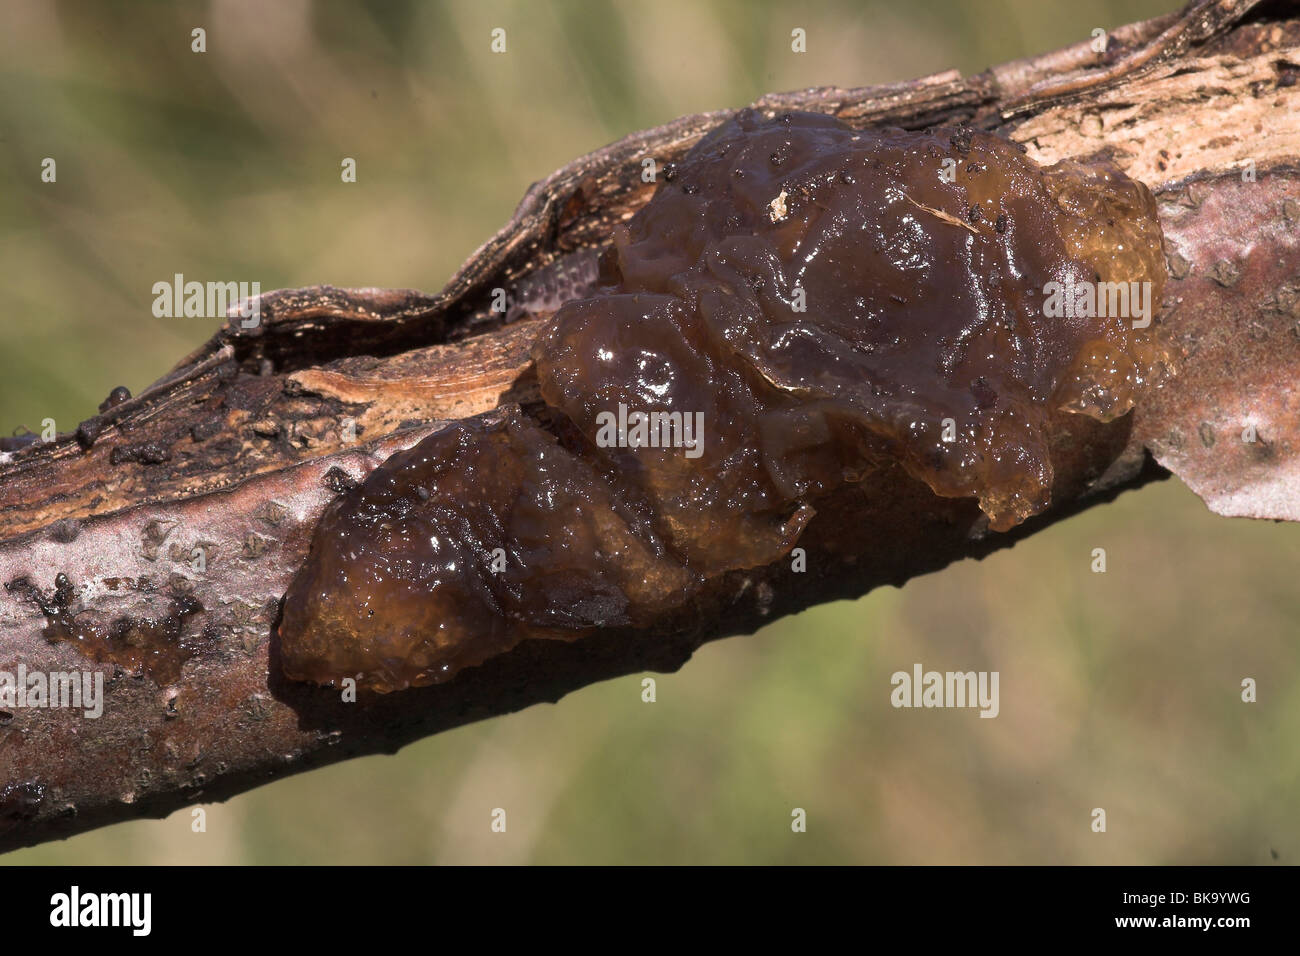 Black Jelly on branch with green background Stock Photo